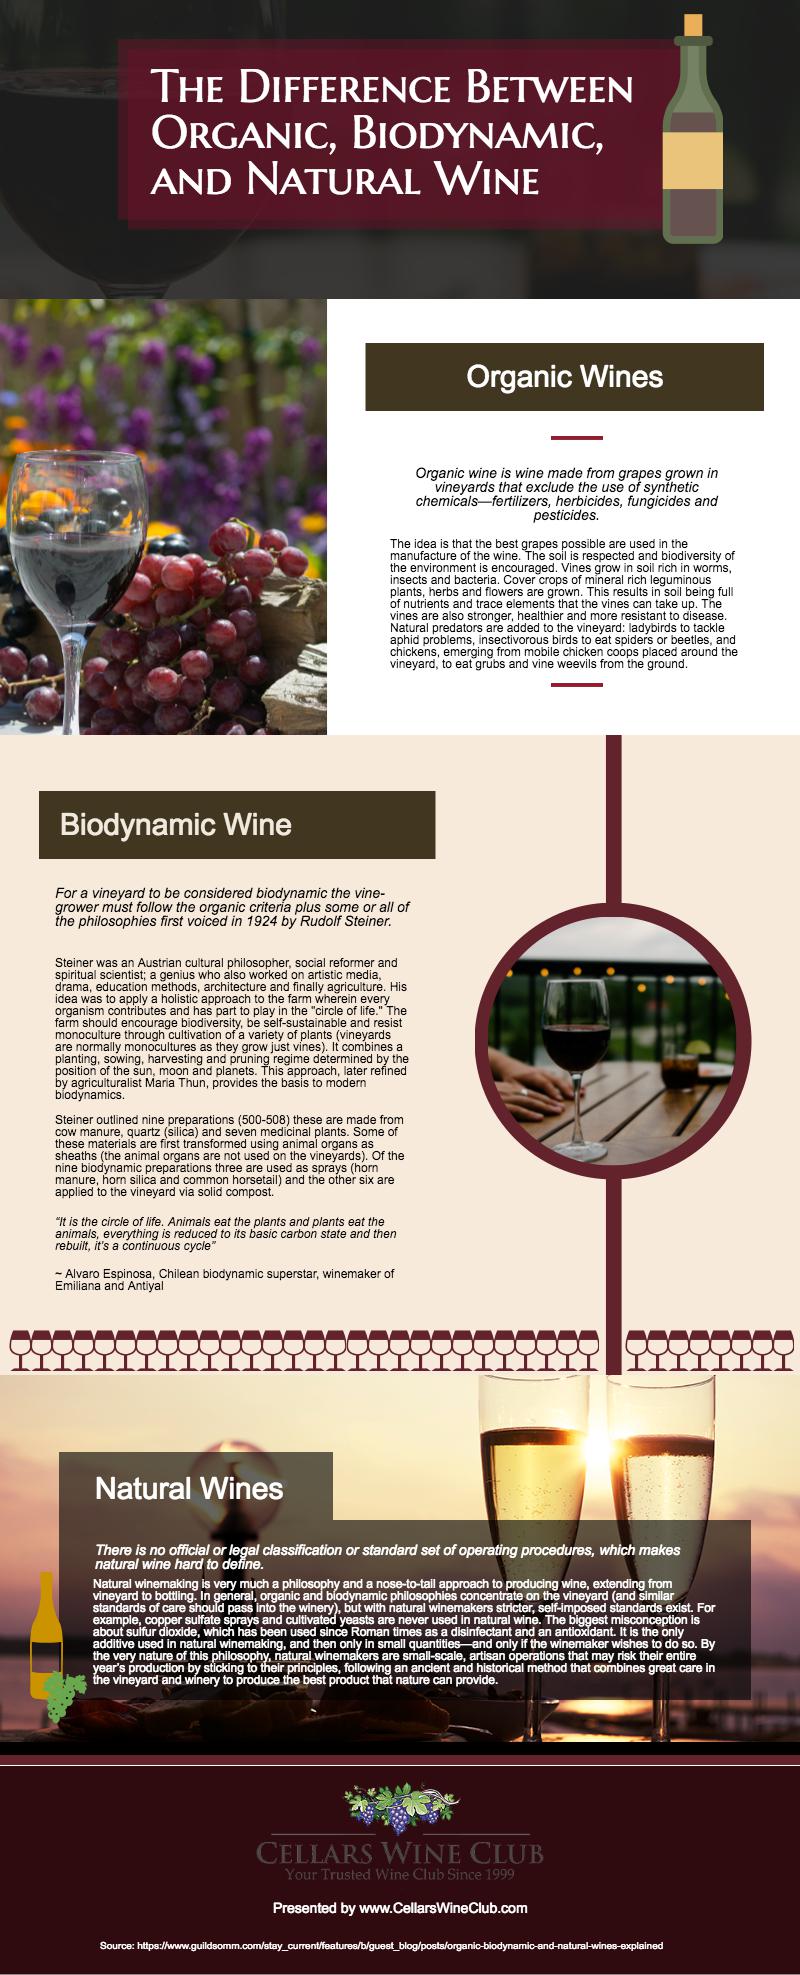 The Difference Between Organic, Biodynamic, and Natural Wine